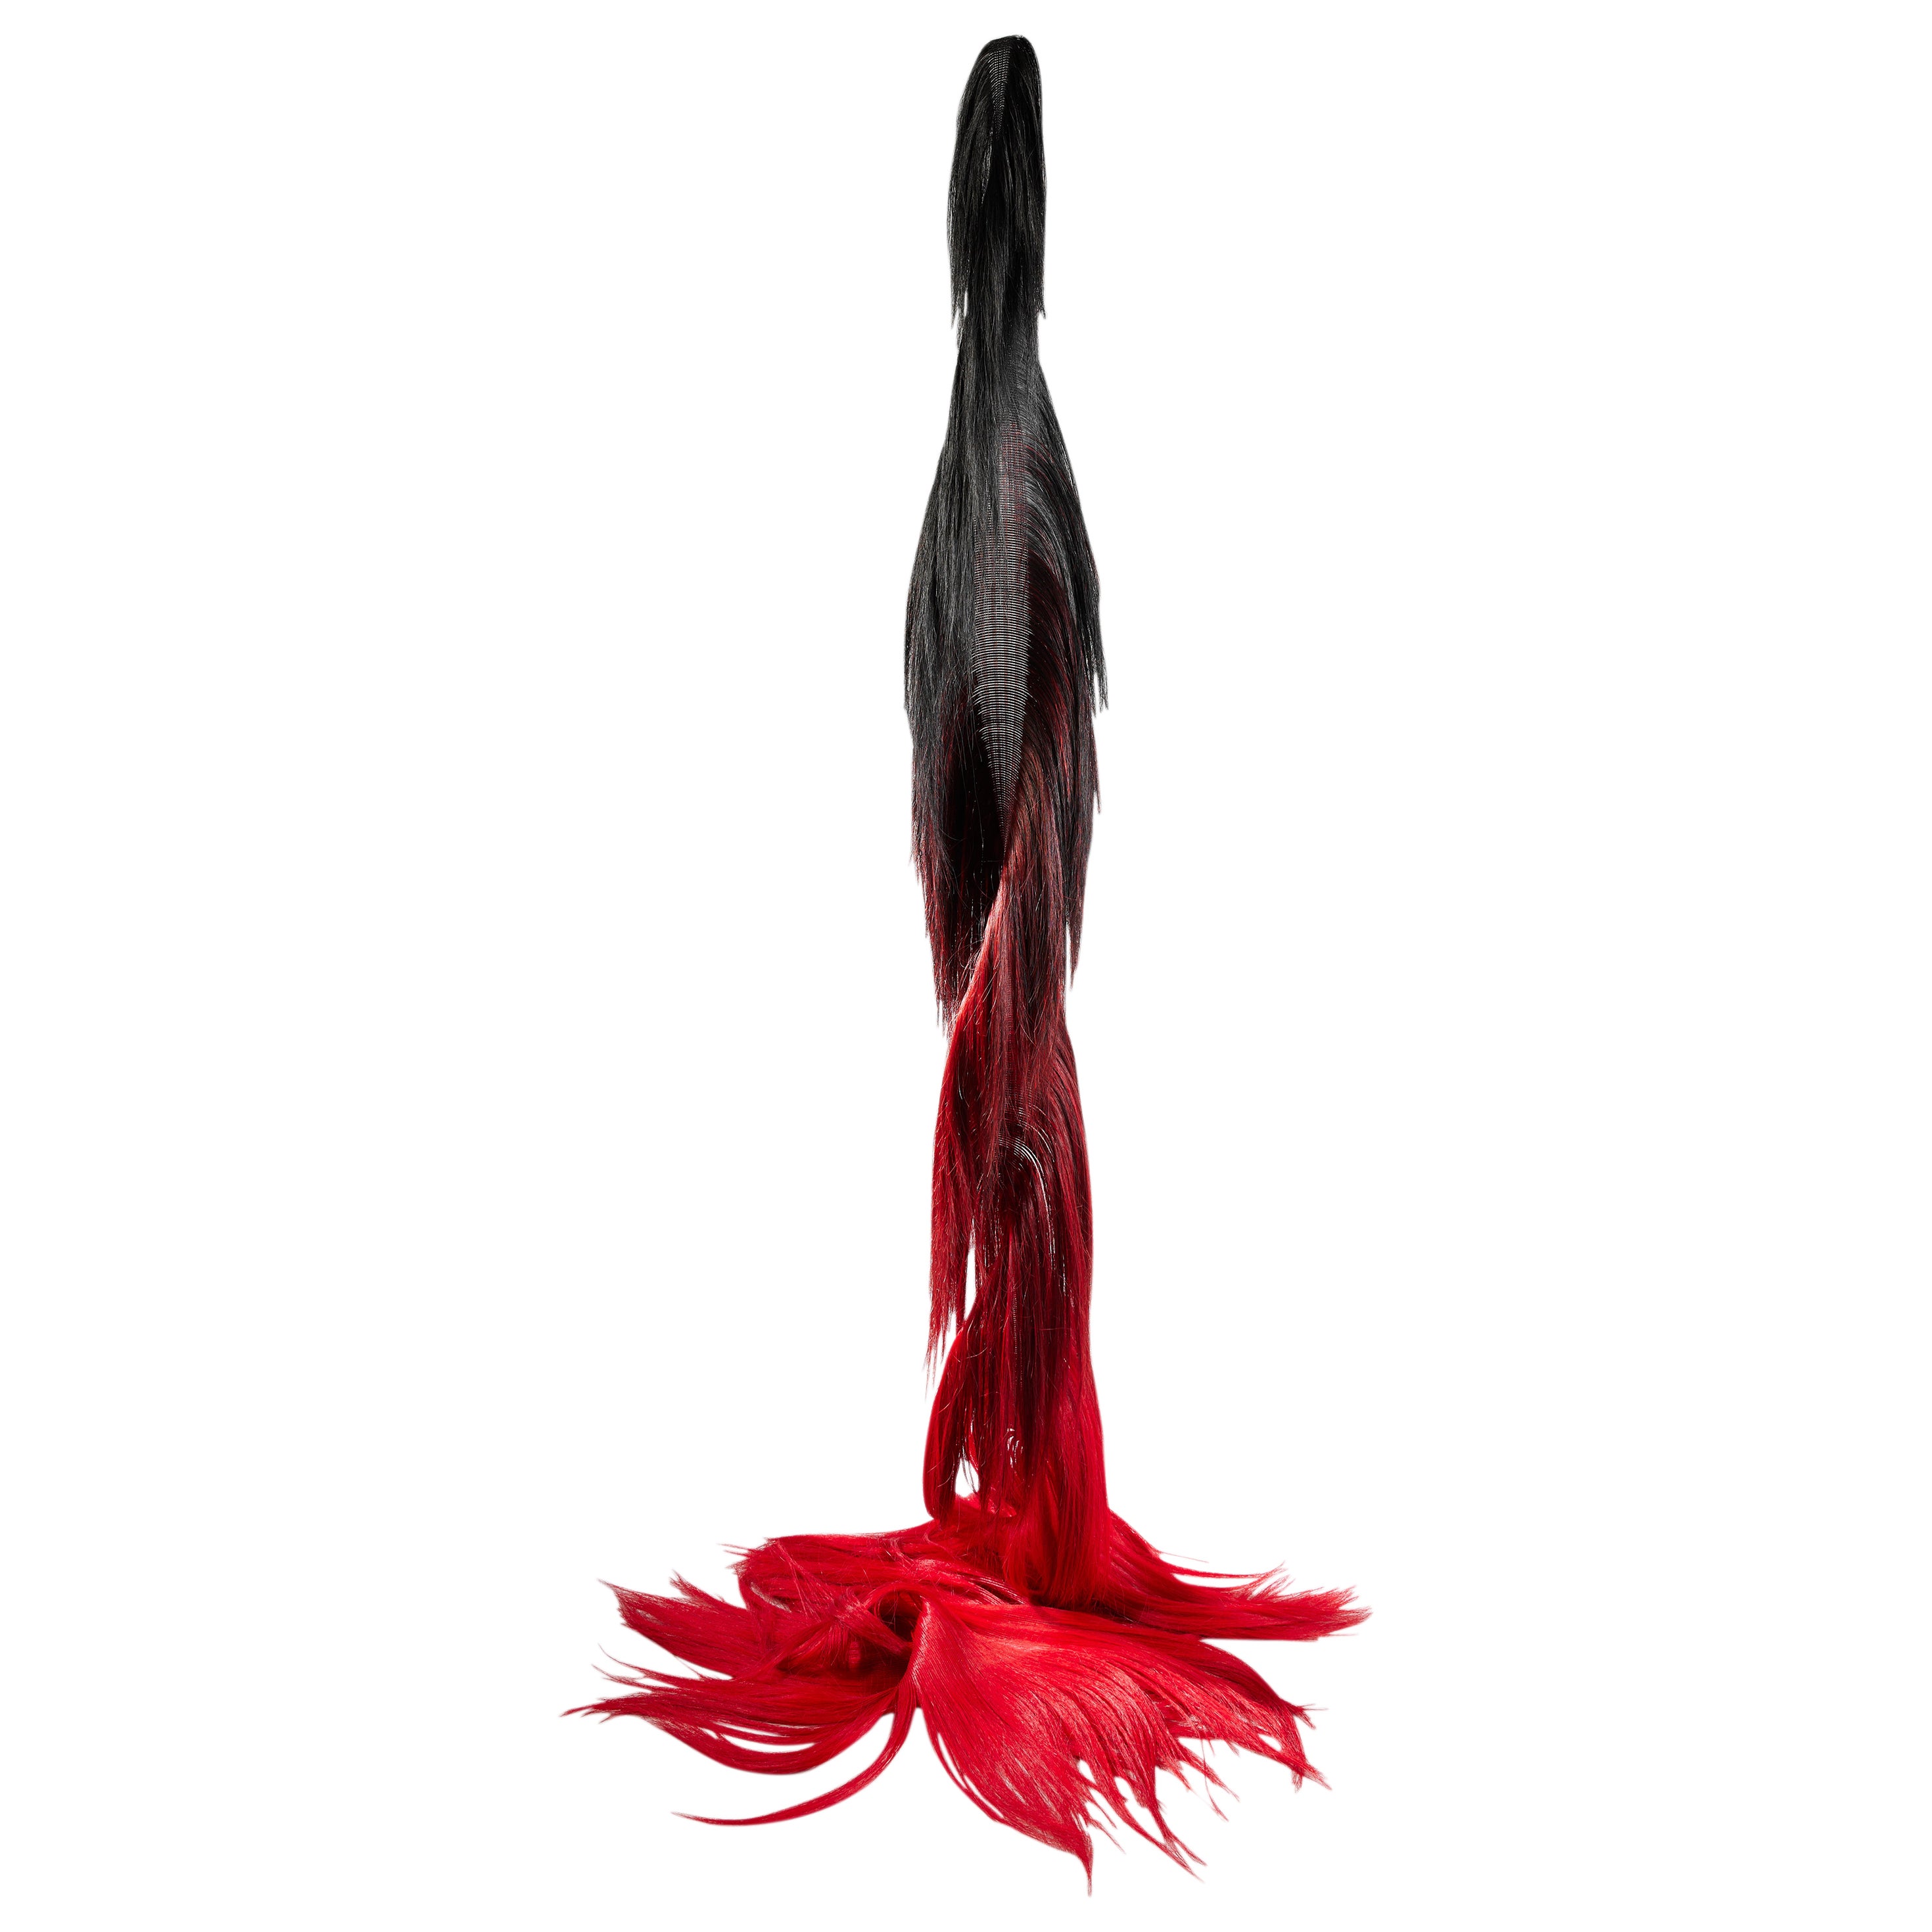 Présence Black Rubis, Horsehair and Nylon sculpture by Ulrika Lljedahl For Sale